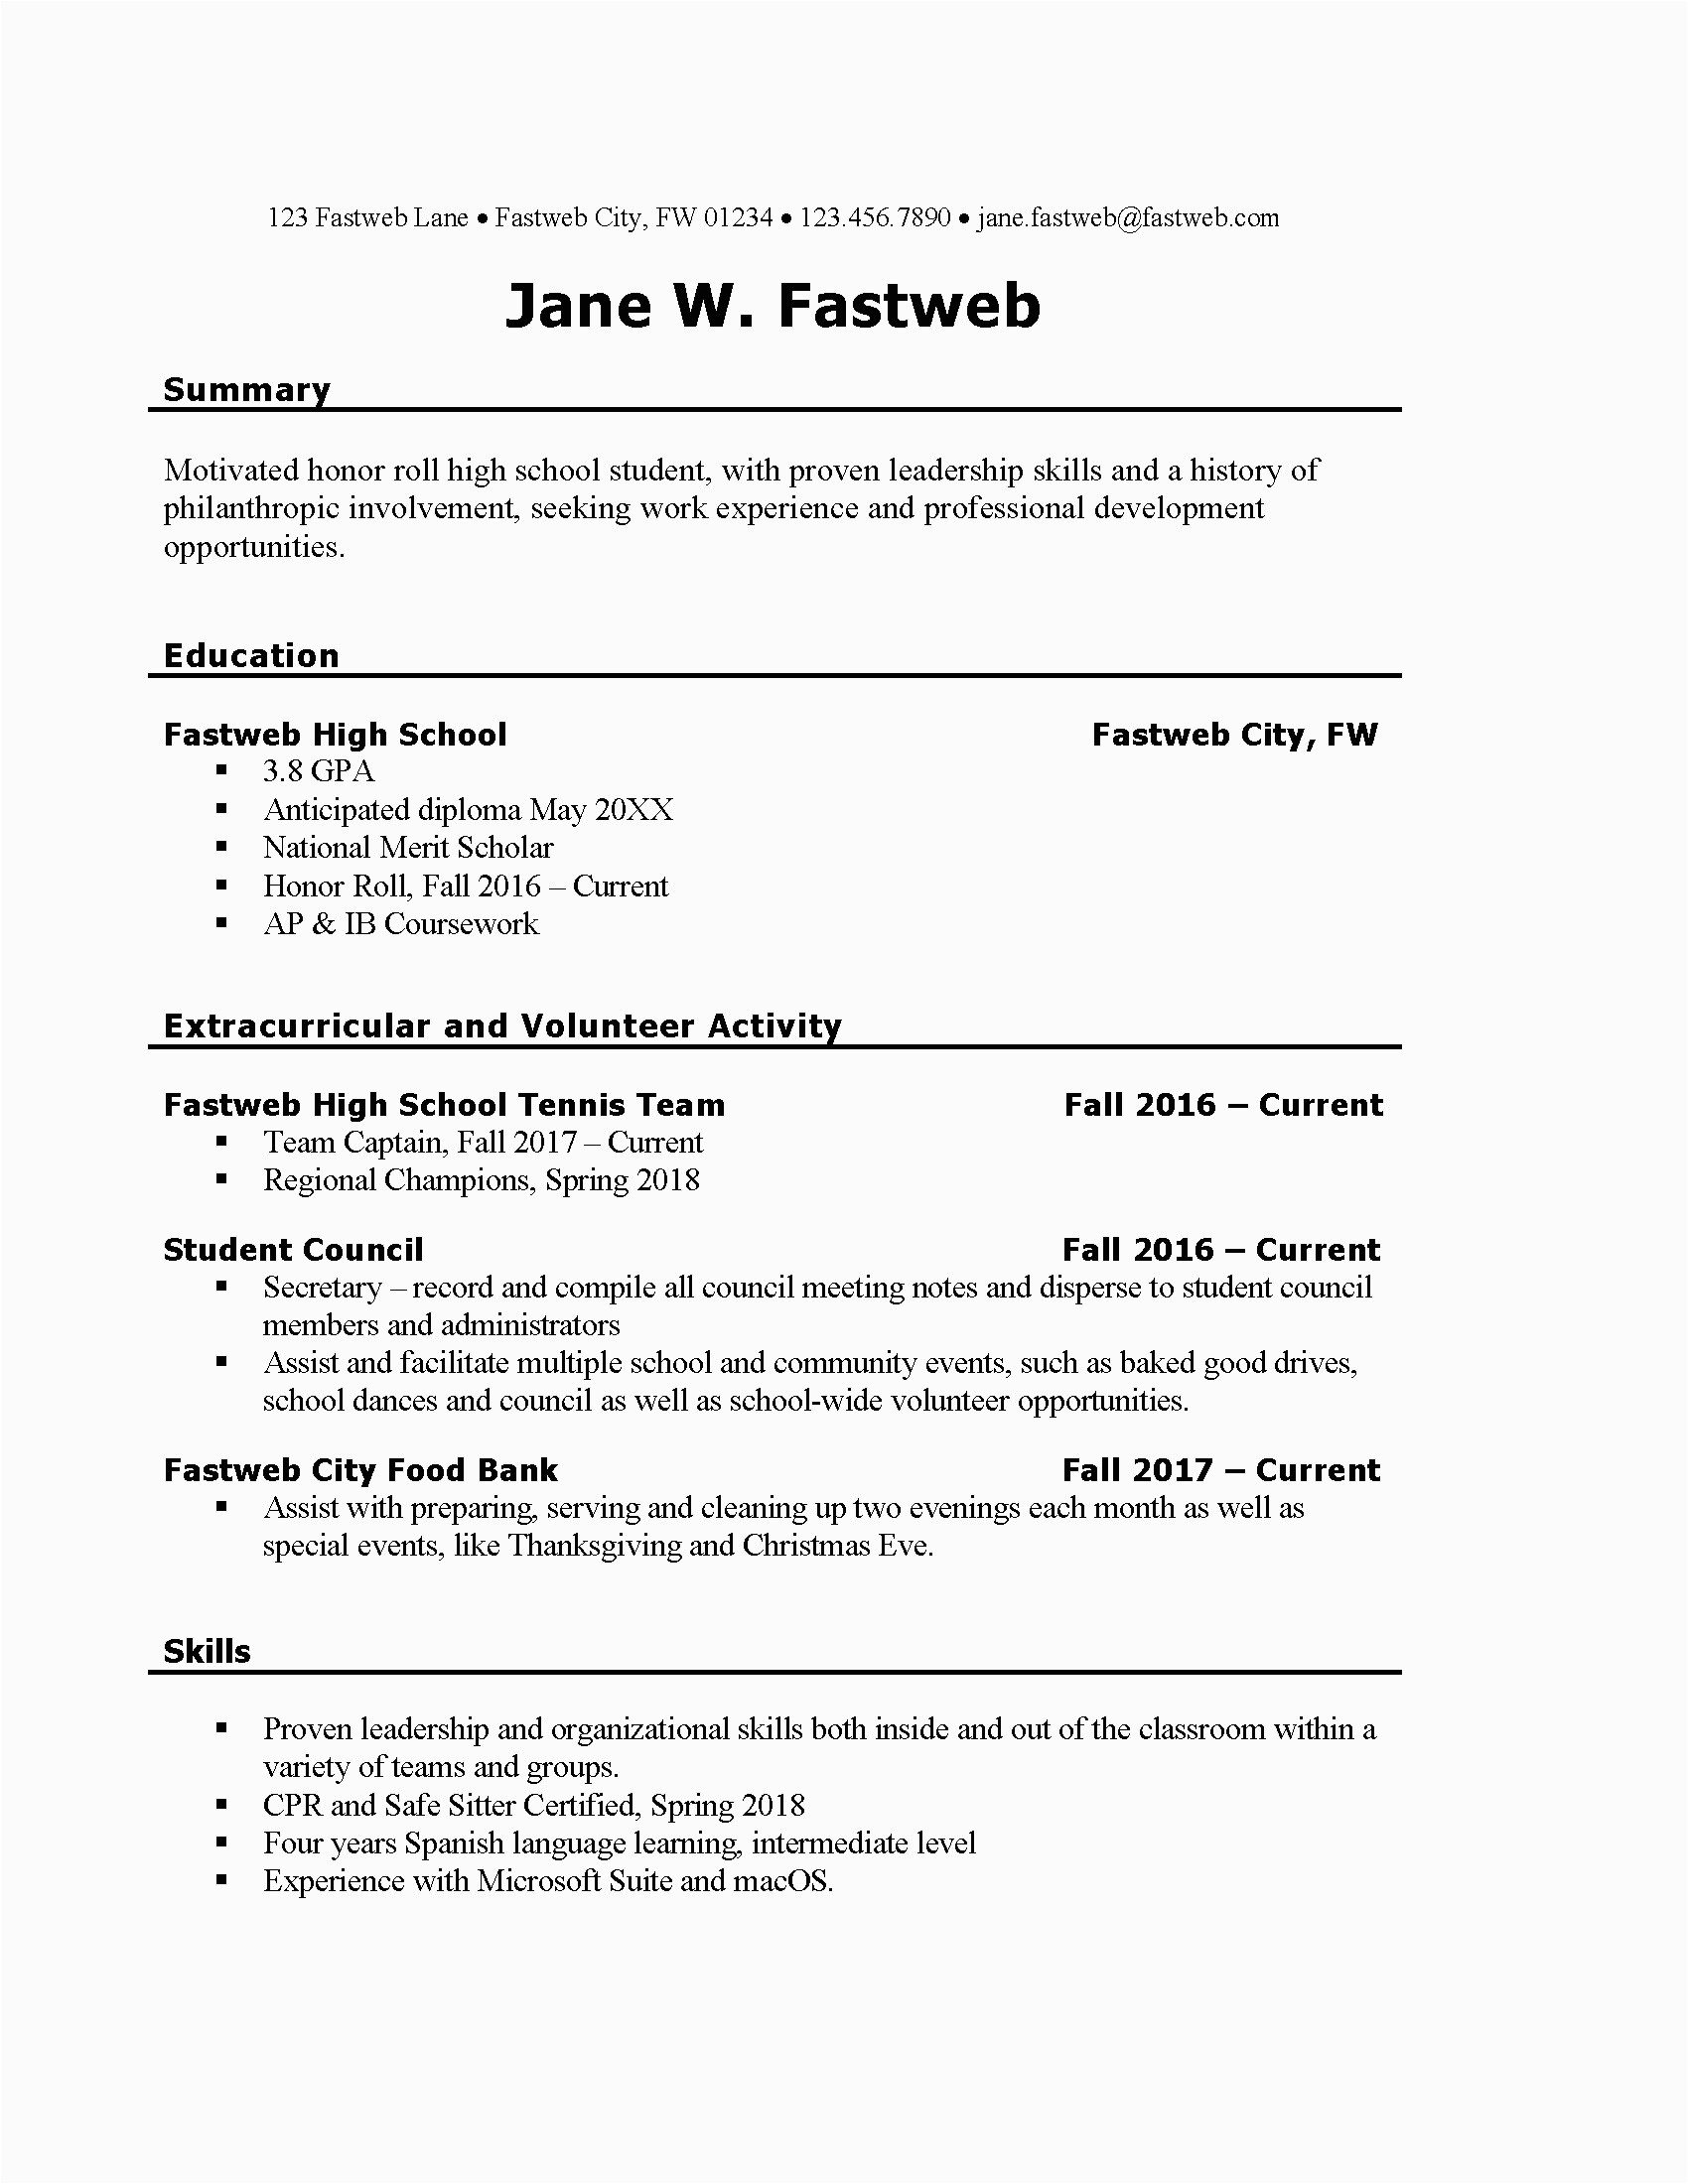 Resume Template for First Job Teenager Resume Examples for Teenager First Job